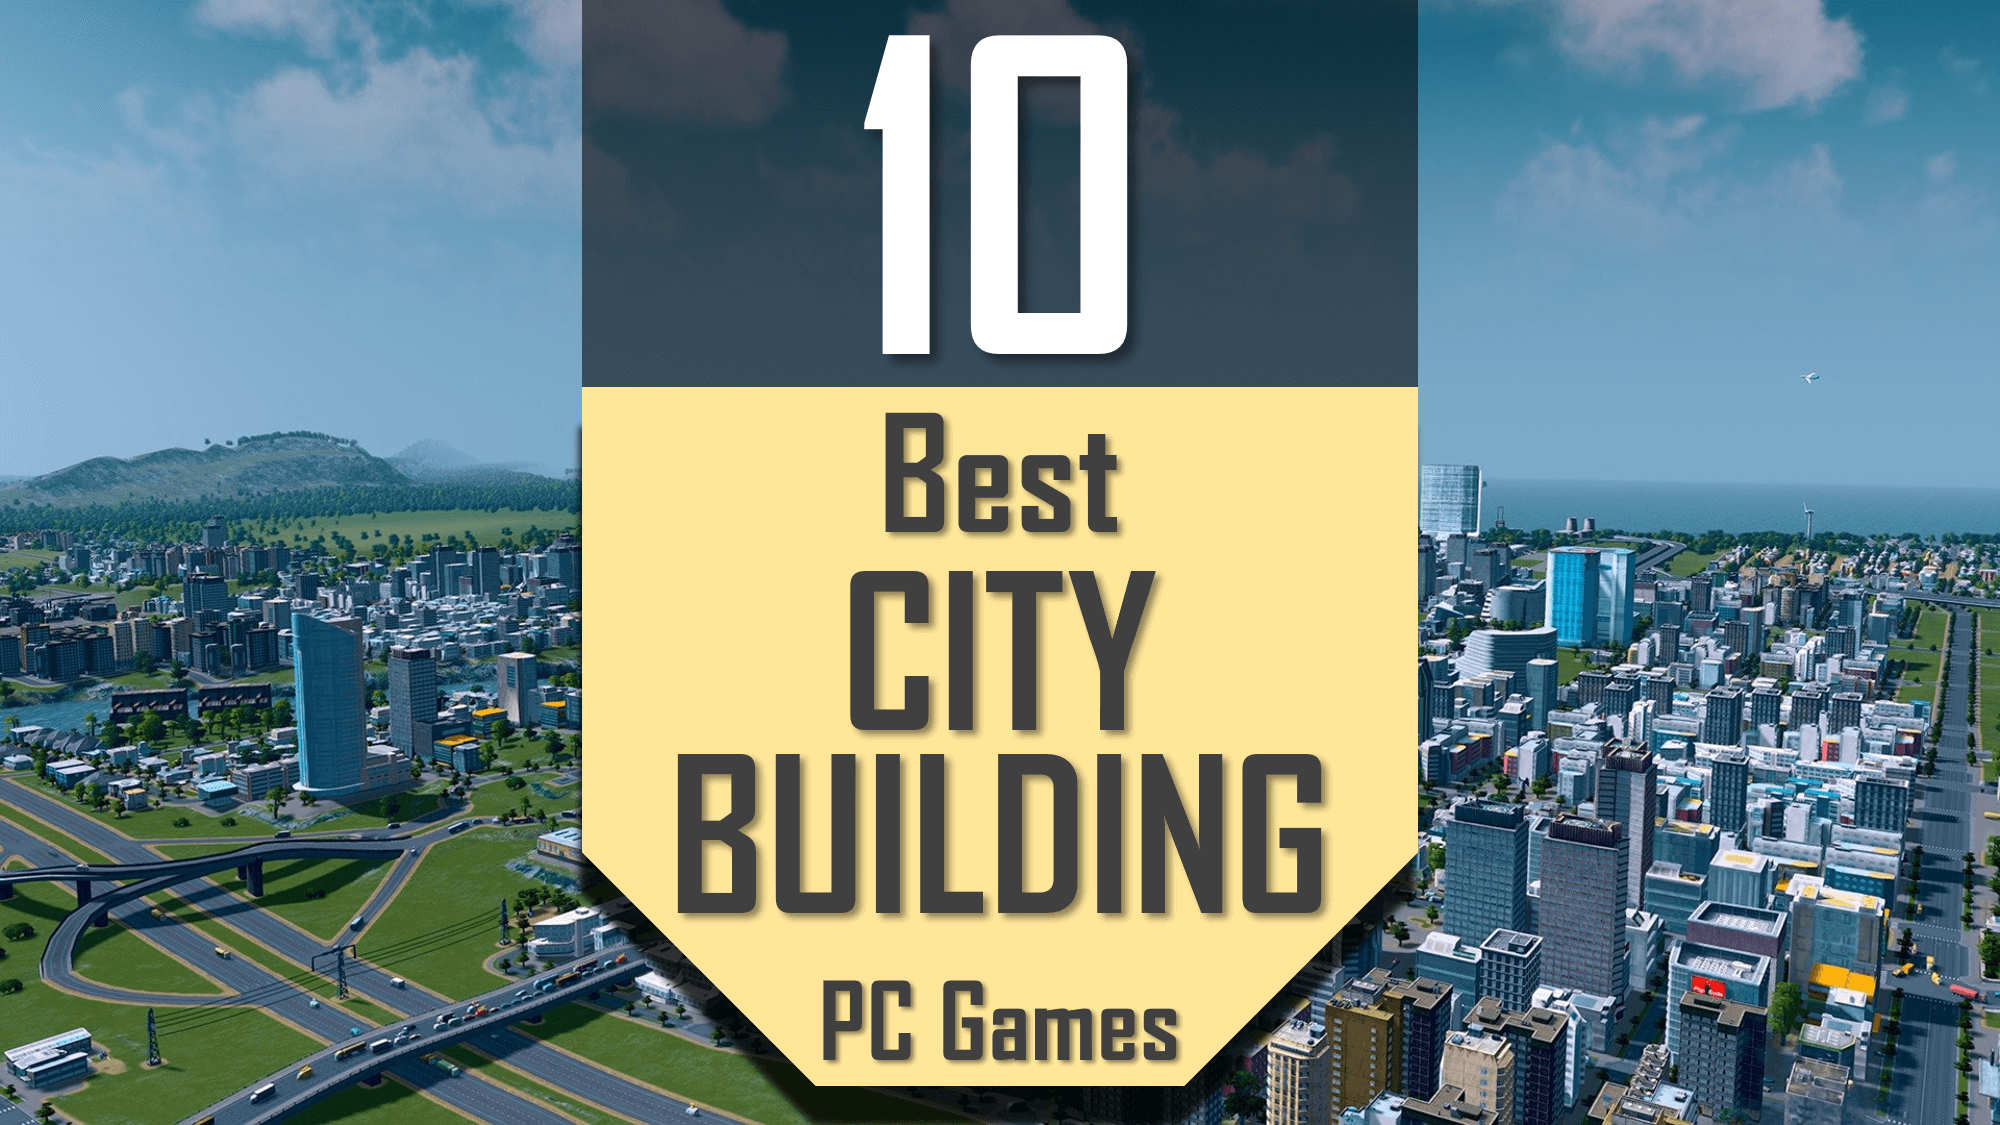 offline city building games for pc free download full version